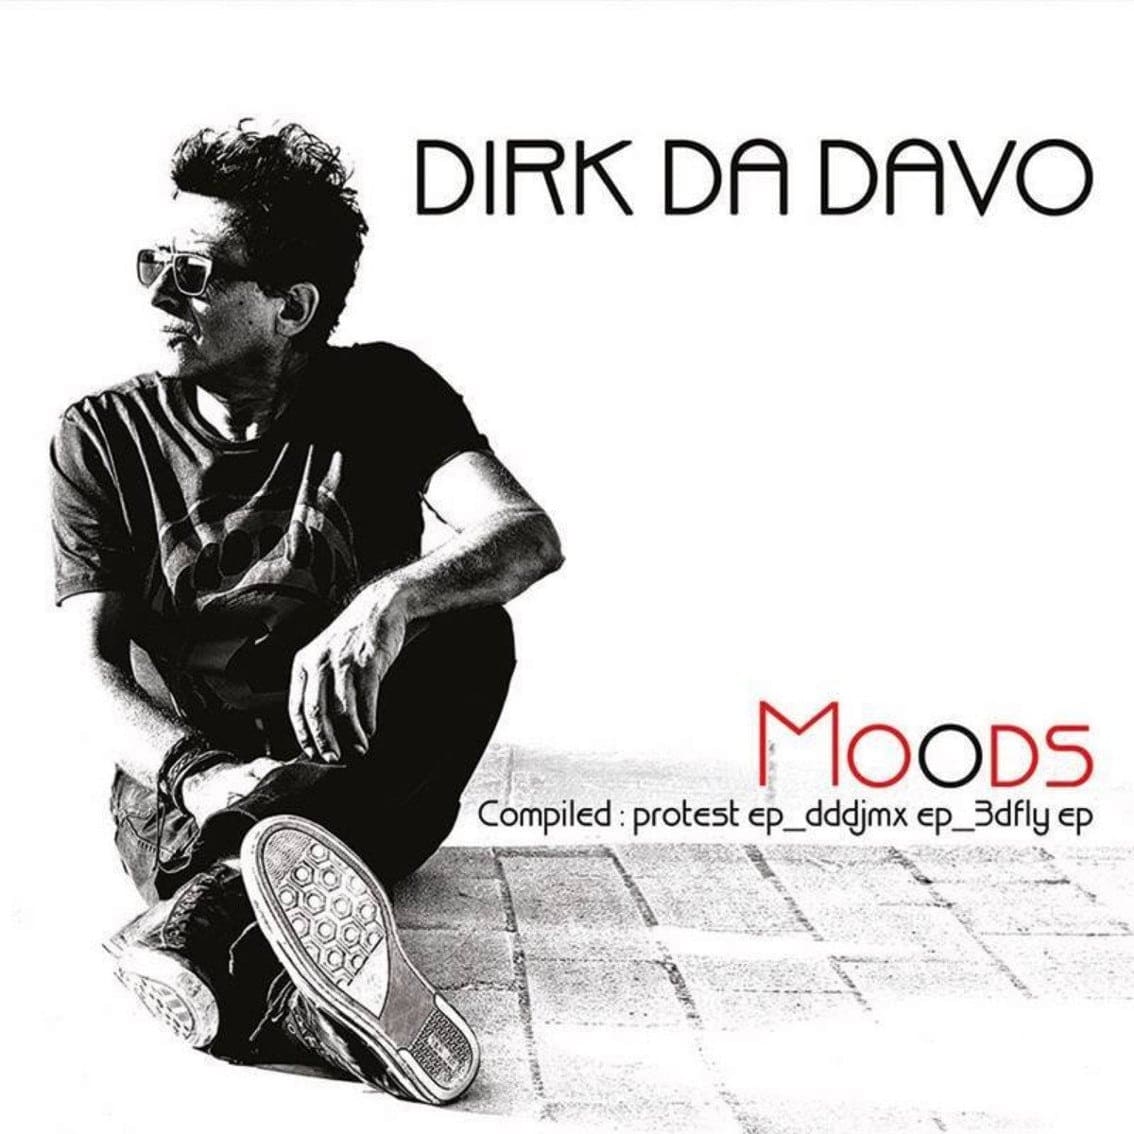 Dirk Da Davo back with 'MOODS' album - limited to 200 copies!